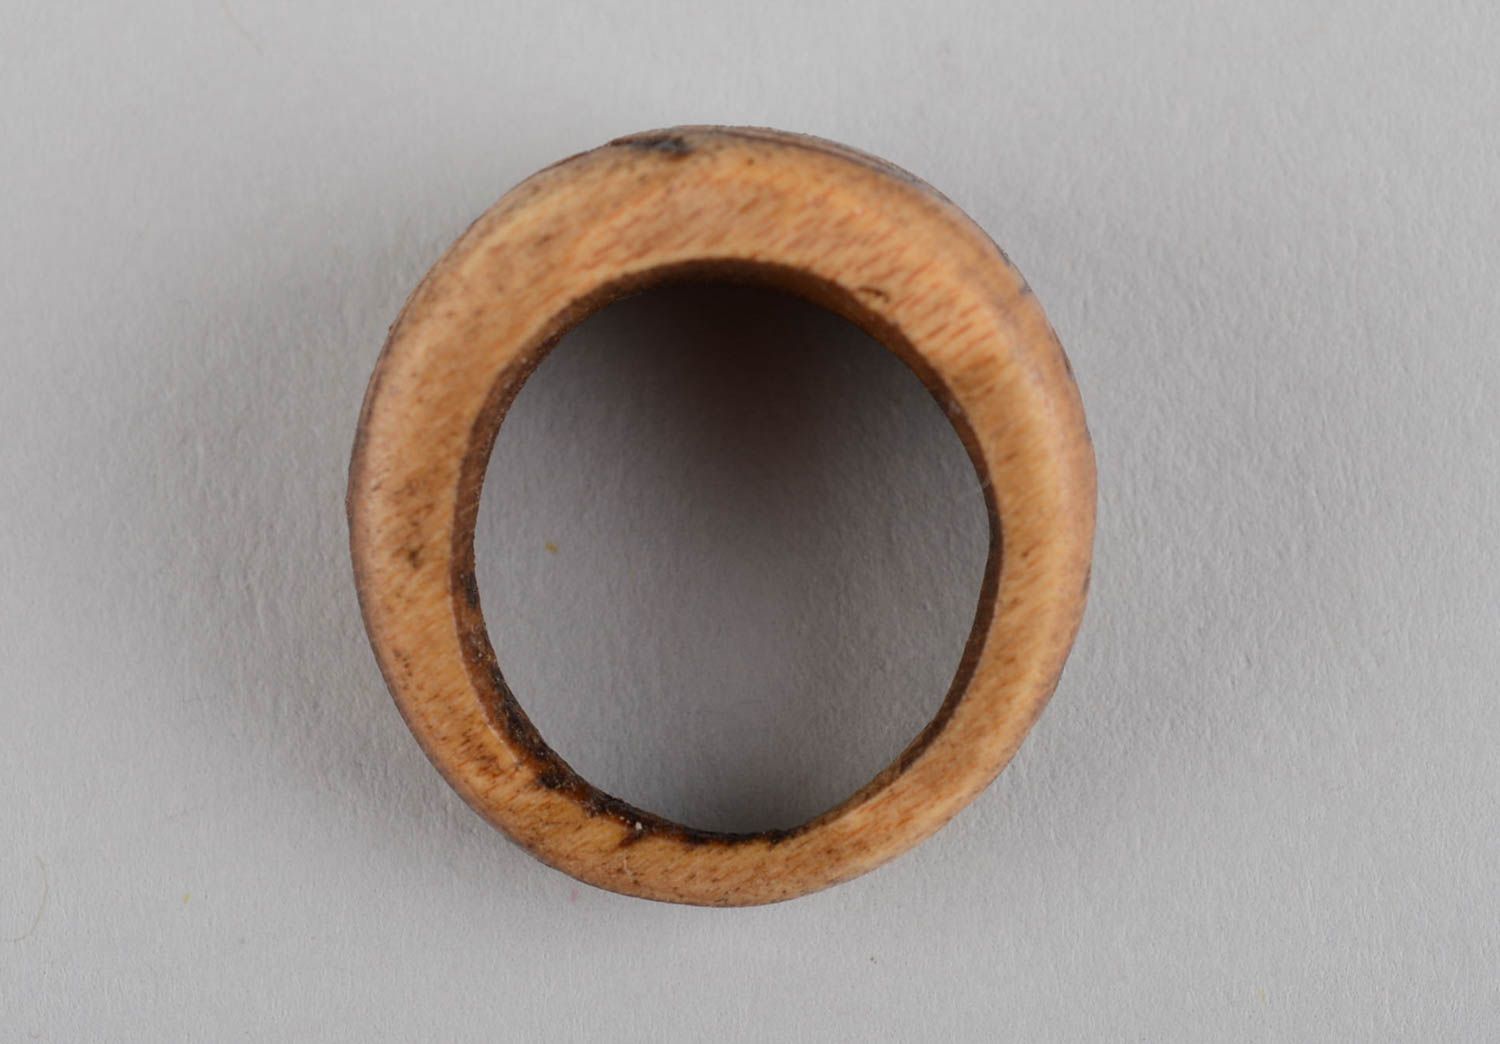 Beautiful handmade wooden ring fashion trends accessories for girls wood craft photo 7